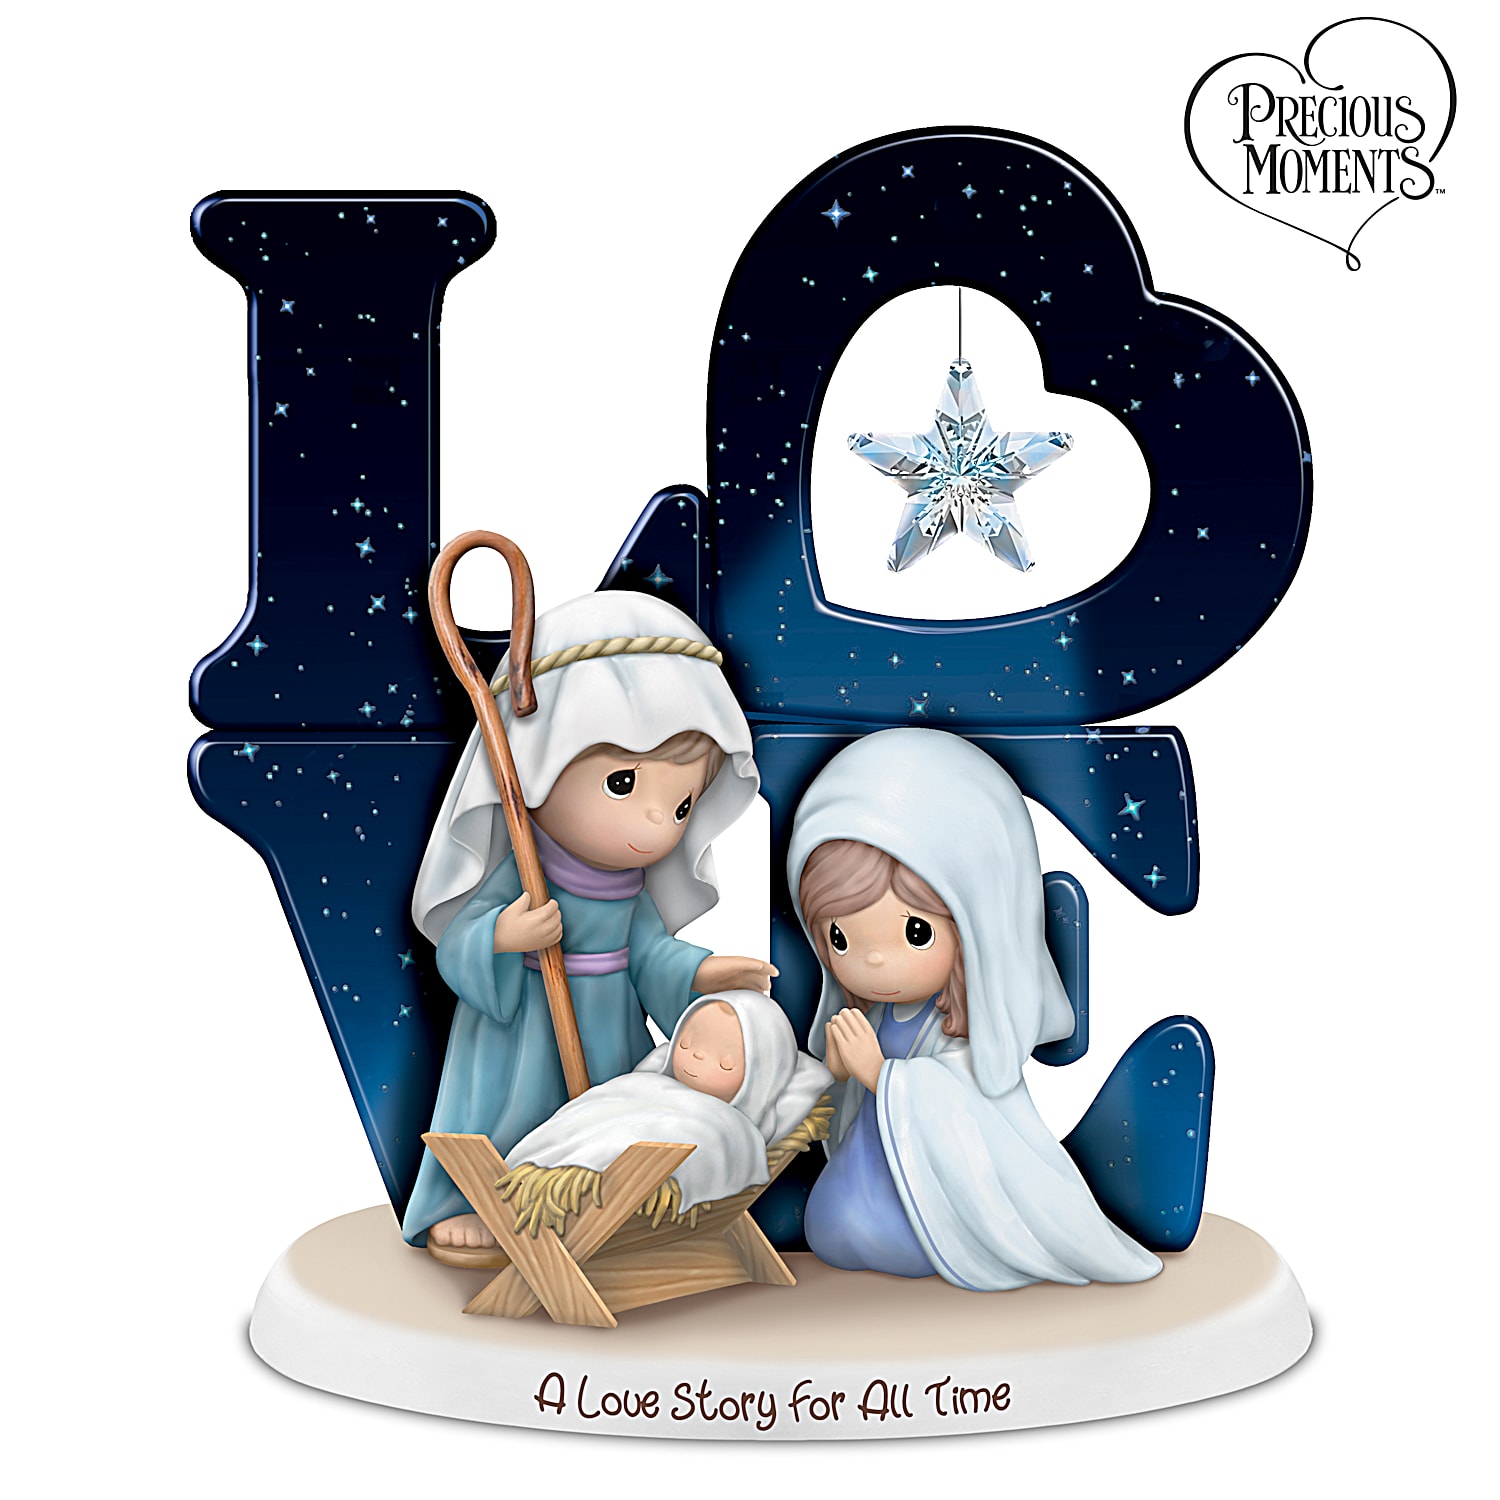 Precious Moments A Love Story For All Time Hand-Painted Religious Nativity  Figurine Featuring A Radiant Hanging Glass Star To Mirror The North Star